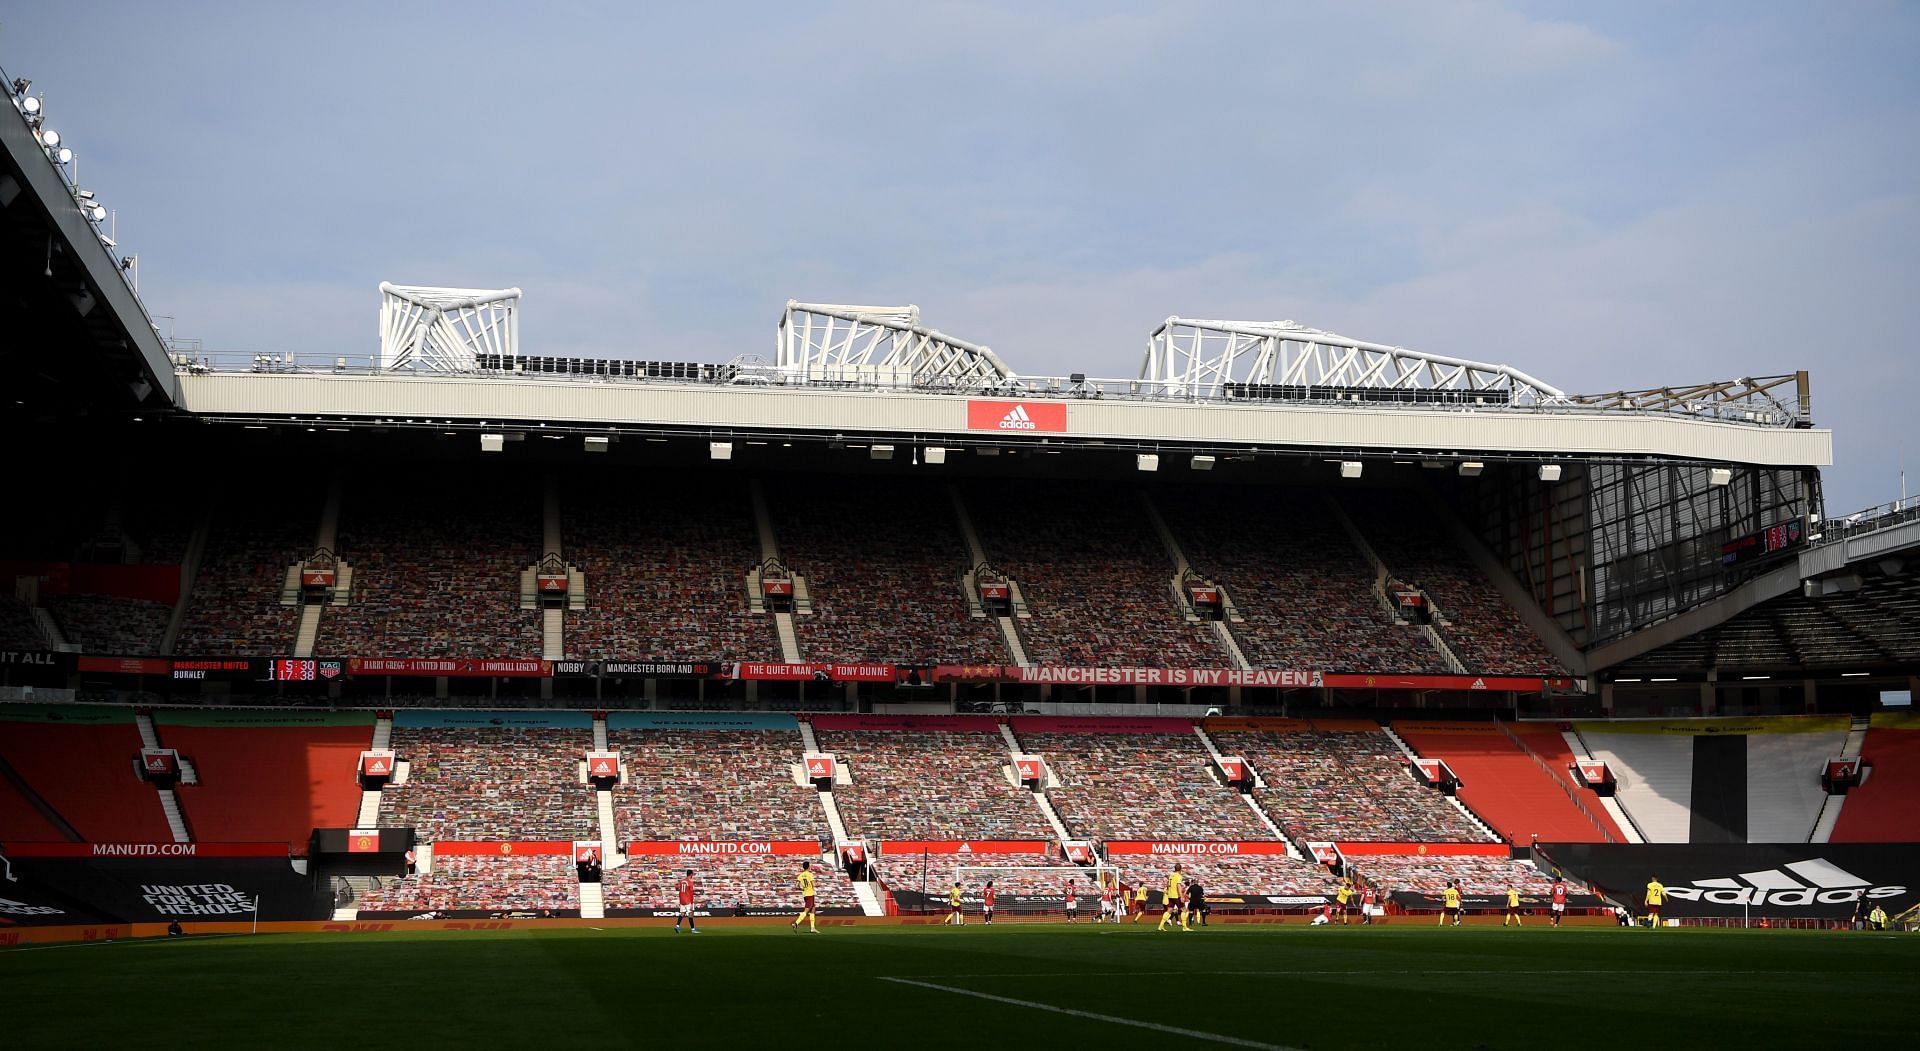 Old Trafford is in need of renovating